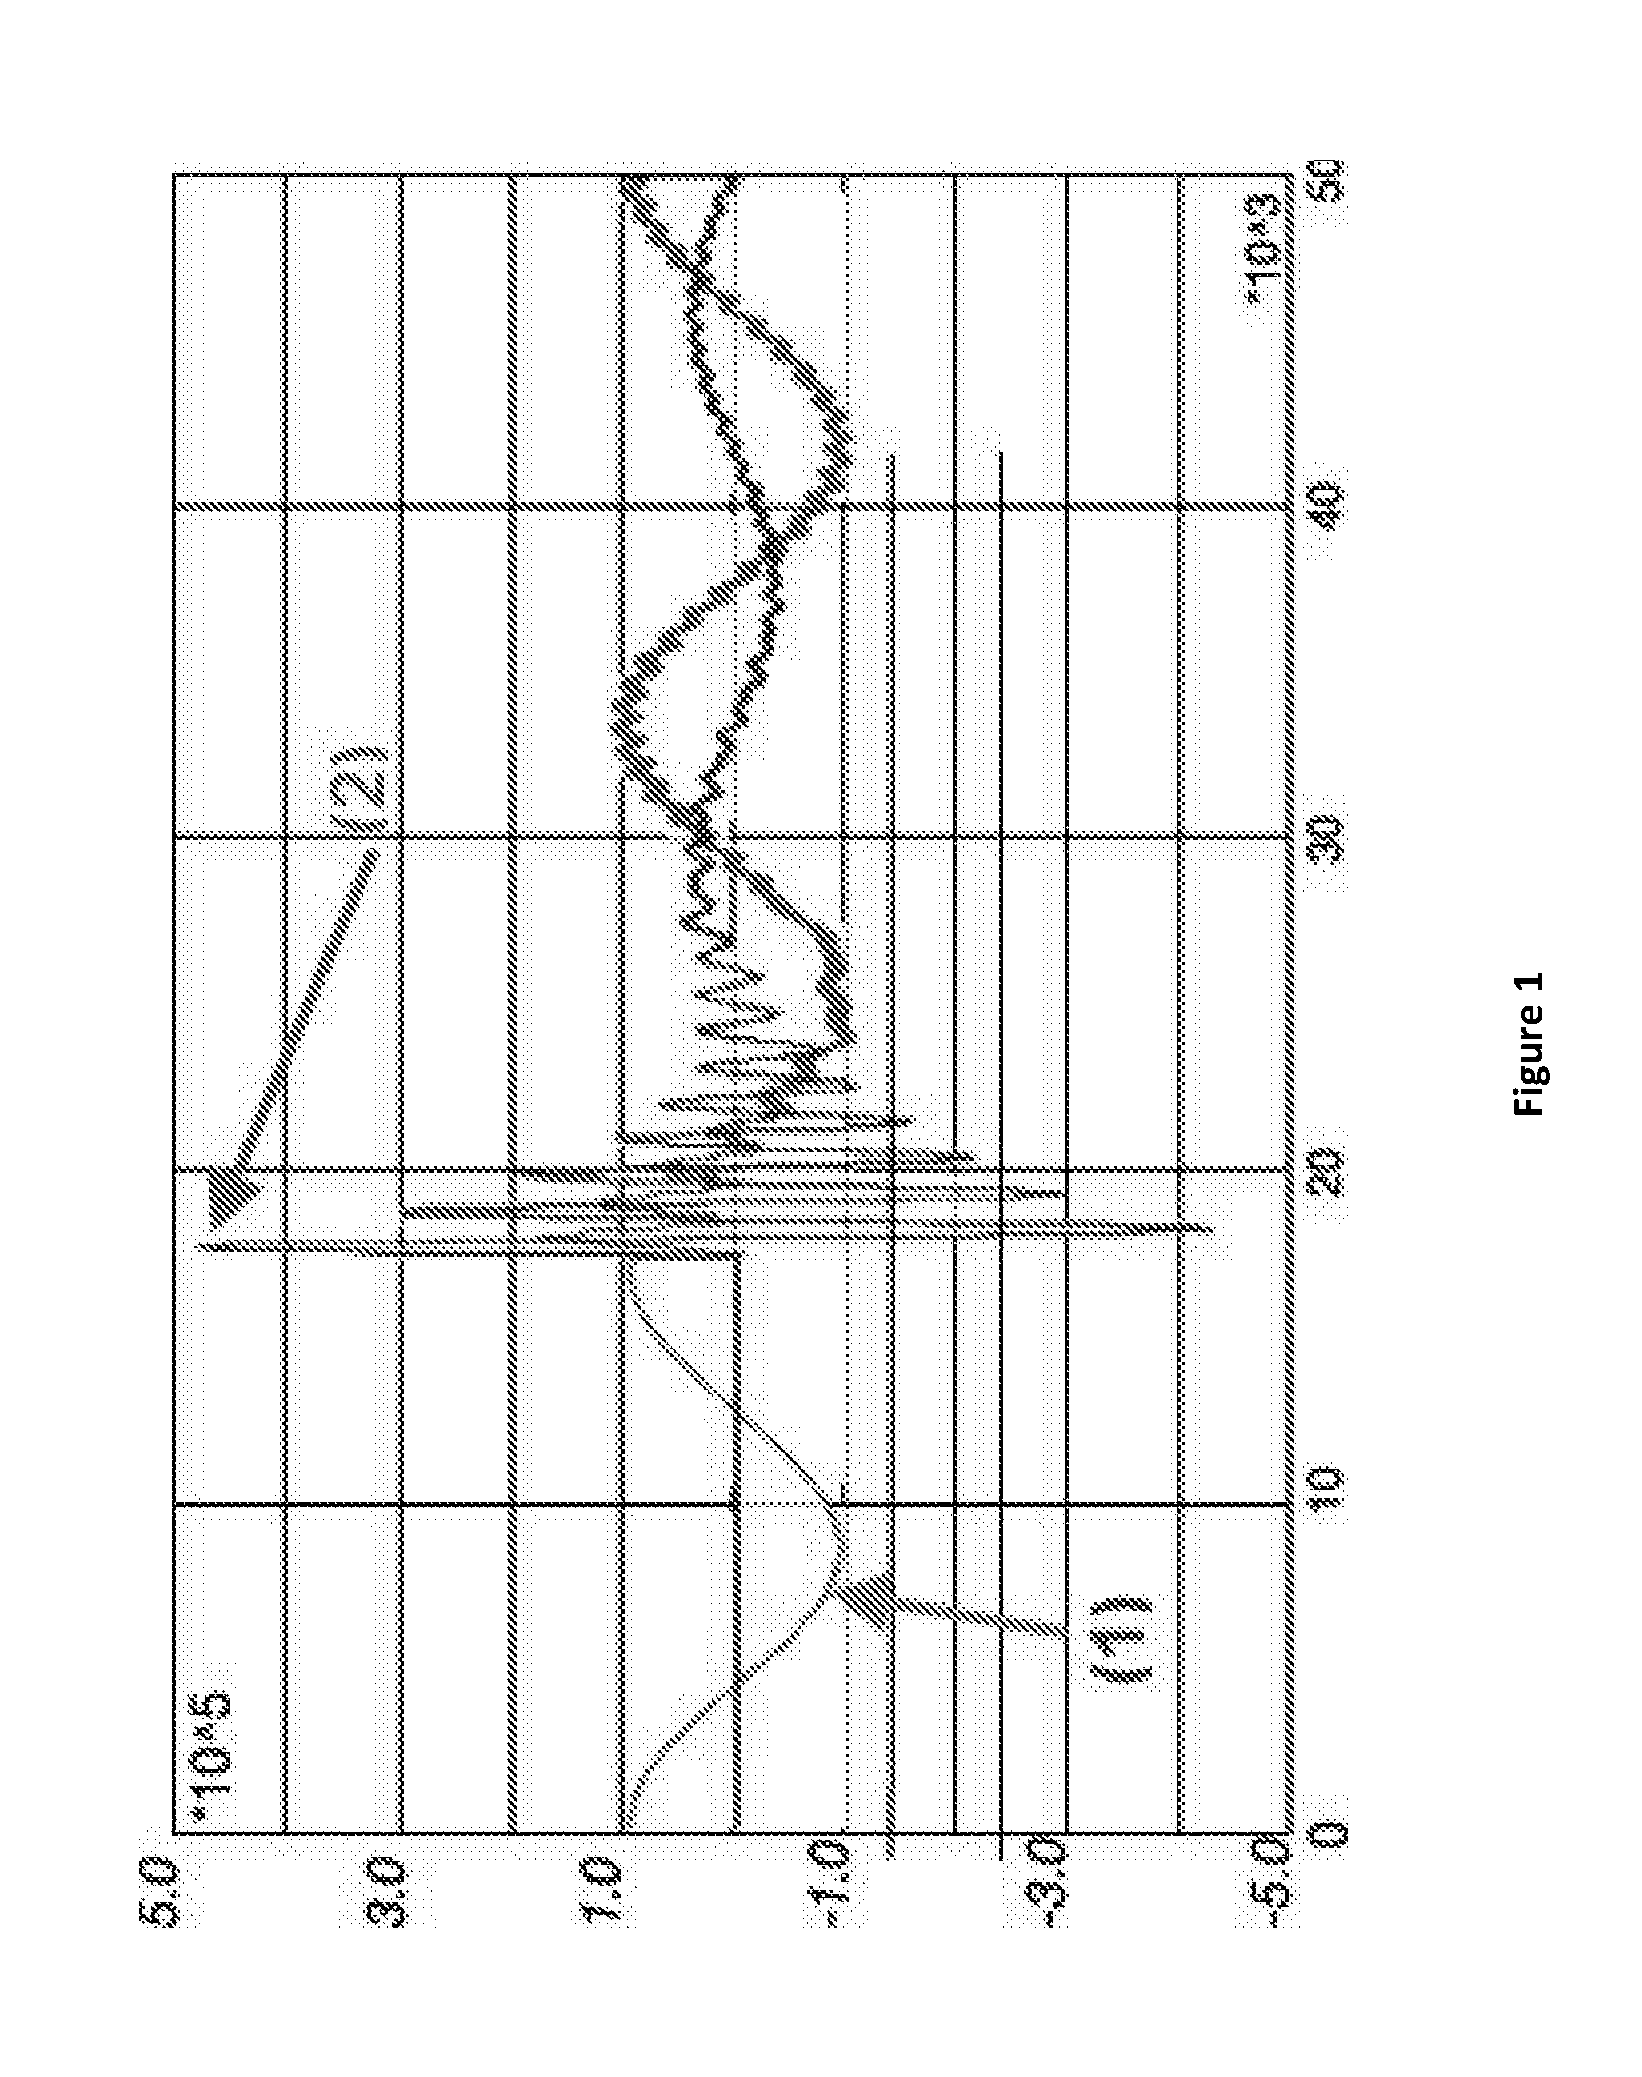 Controlled Switching Devices and Method of Using the Same